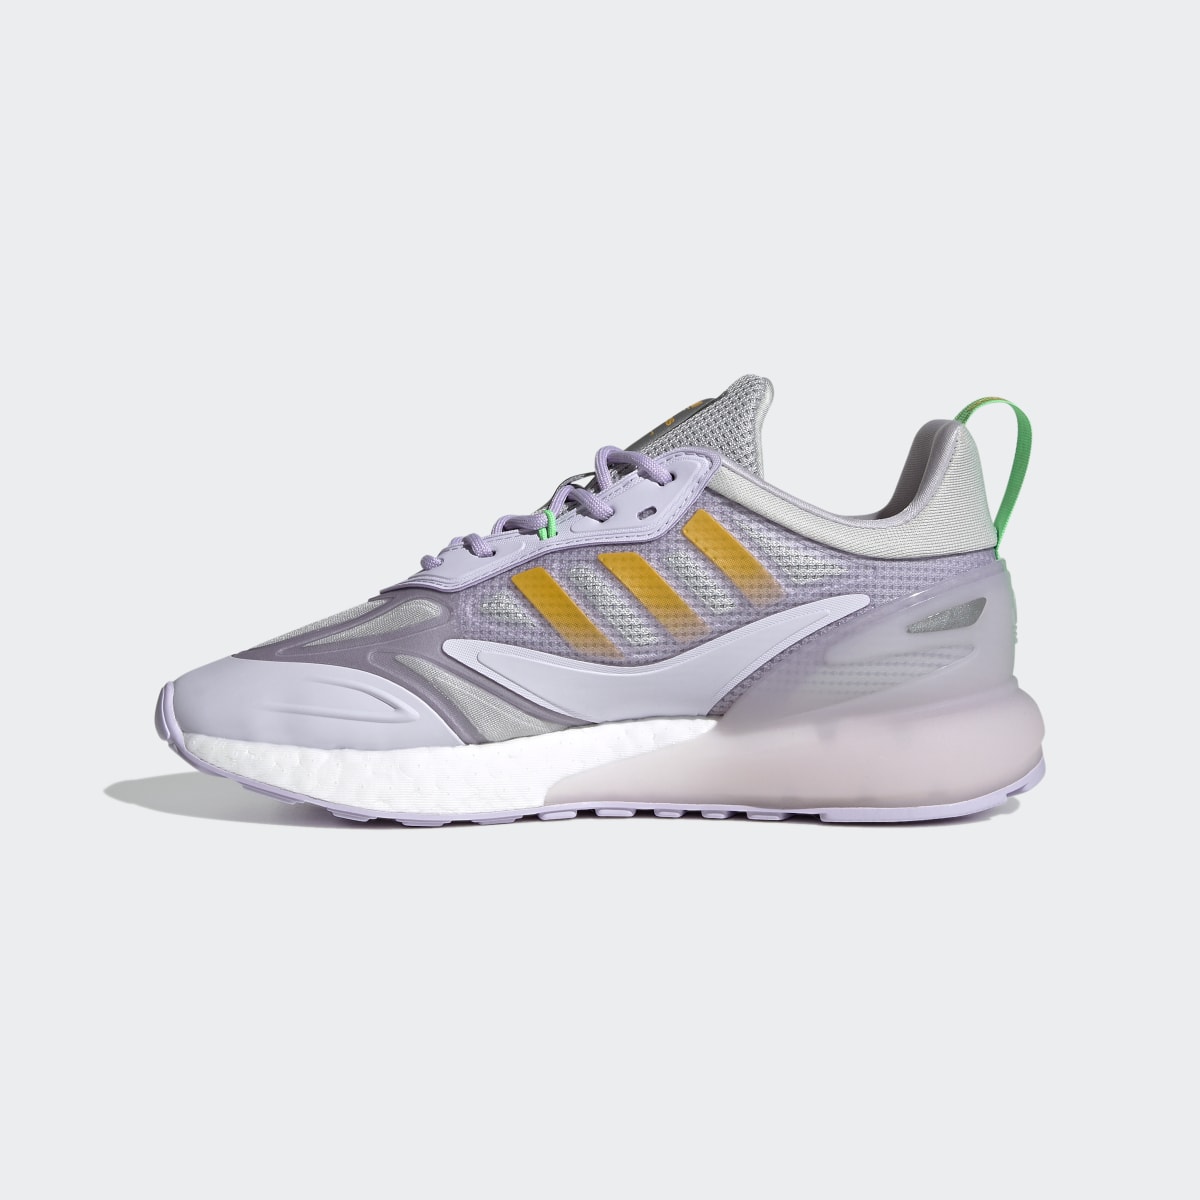 Adidas ZX 2K Boost 2.0 Shoes. 7